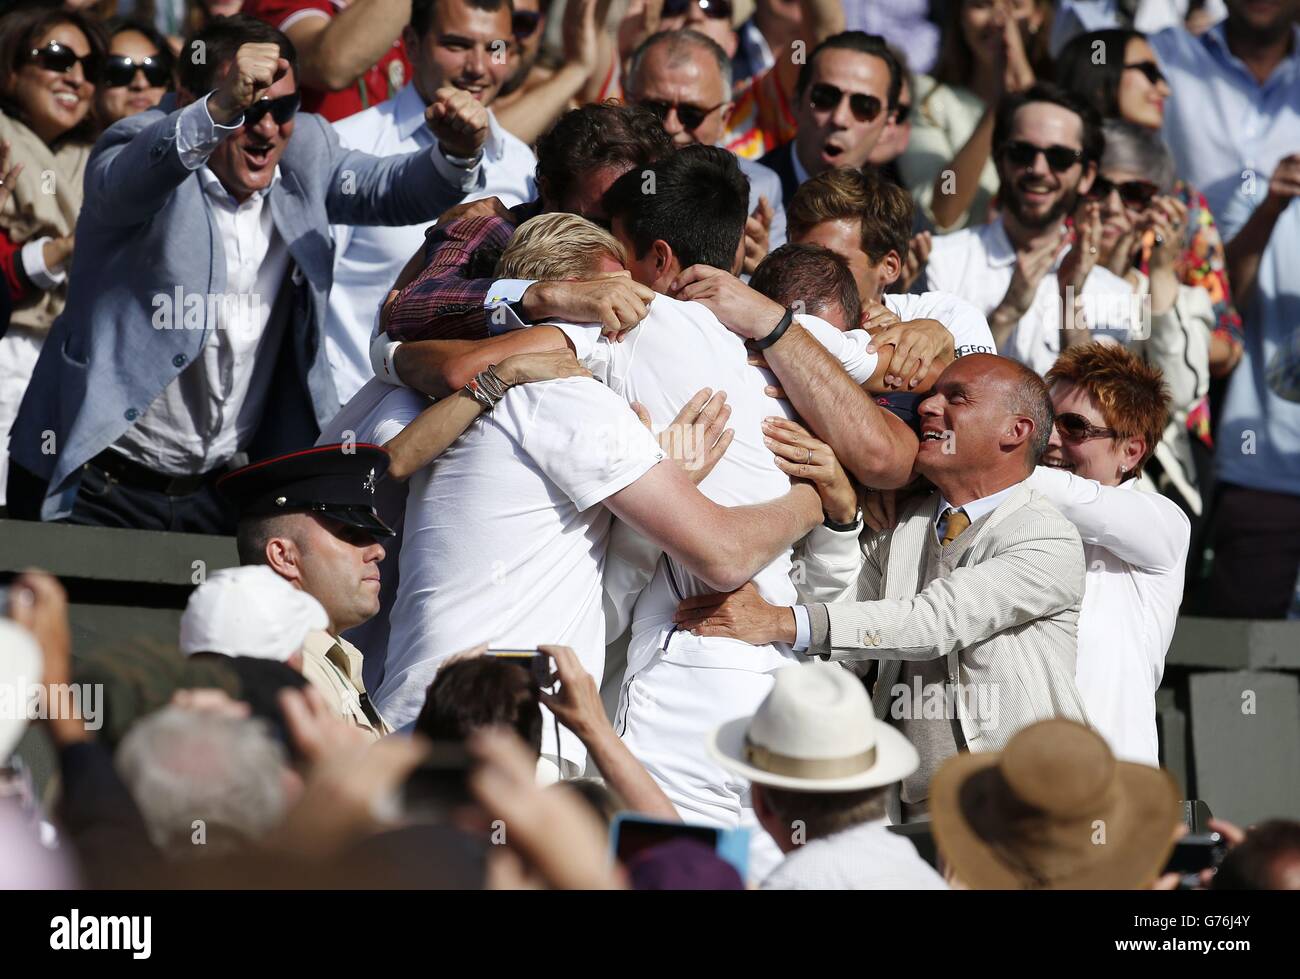 Serbia's Novak Djokovic celebrates defeating Switzerland's Roger Federer with his coaching team in the players box, following the Mens' Singles Final during day fourteen of the Wimbledon Championships at the All England Lawn Tennis and Croquet Club, Wimbledon. Stock Photo